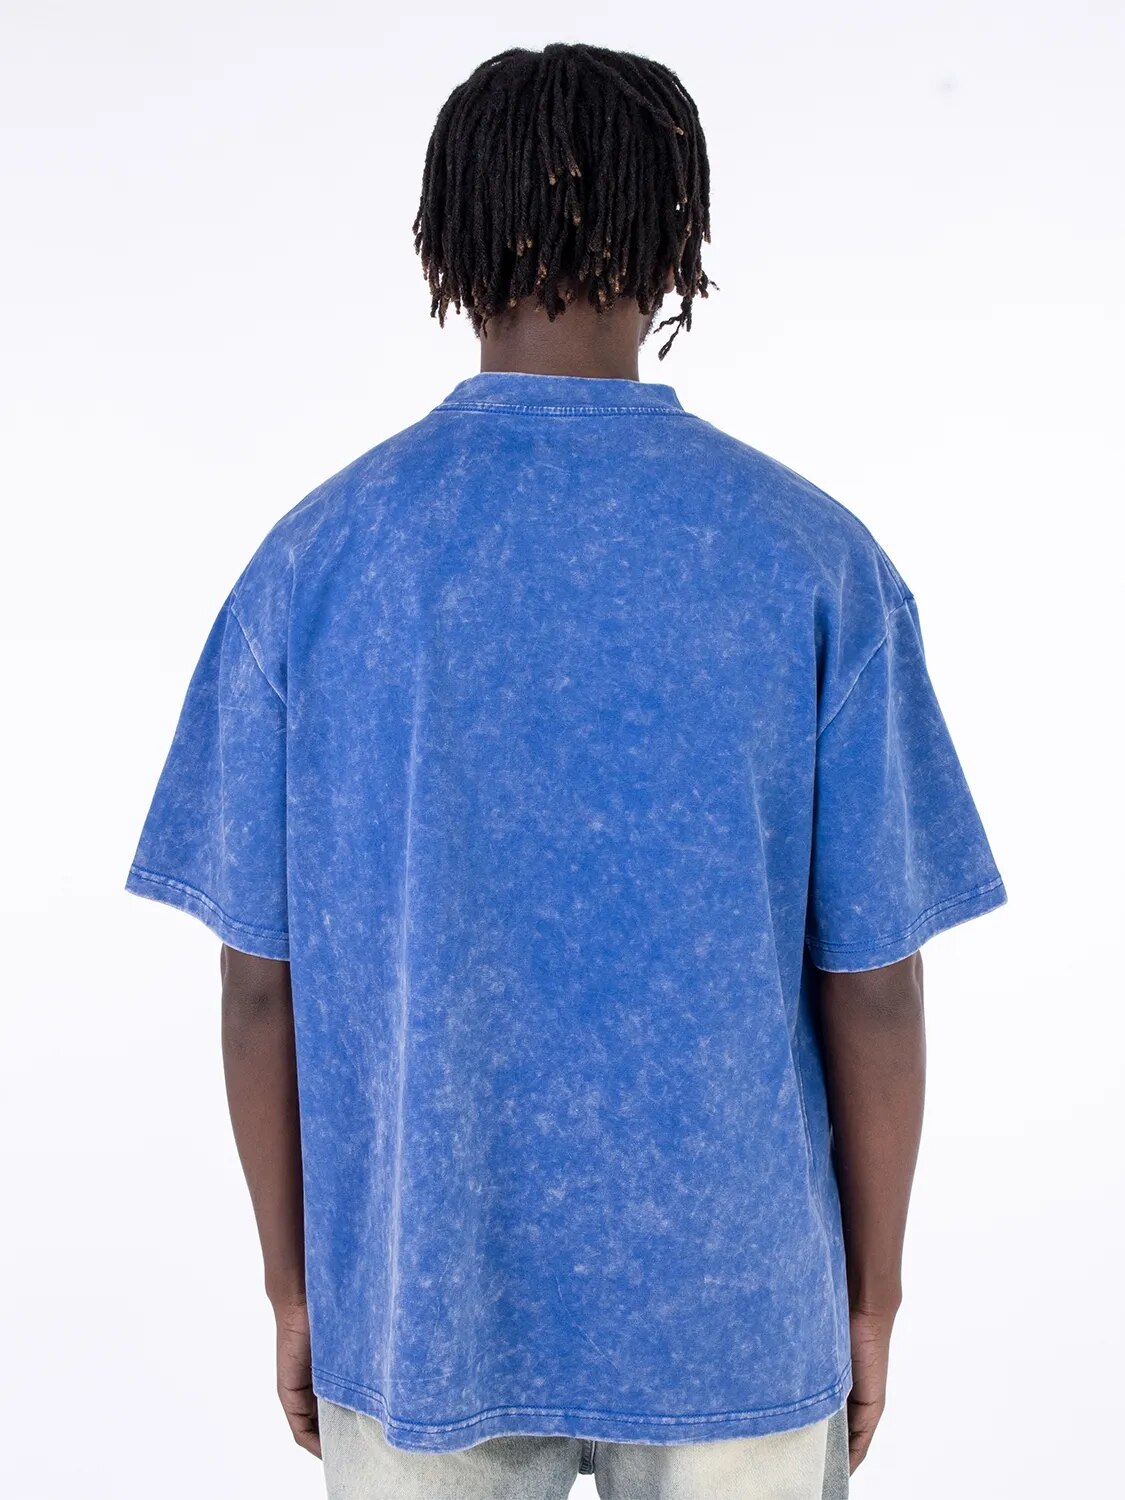 UncleDonJM "GROWING" City Printed Washed Oversized Distressed Cotton T-shirt